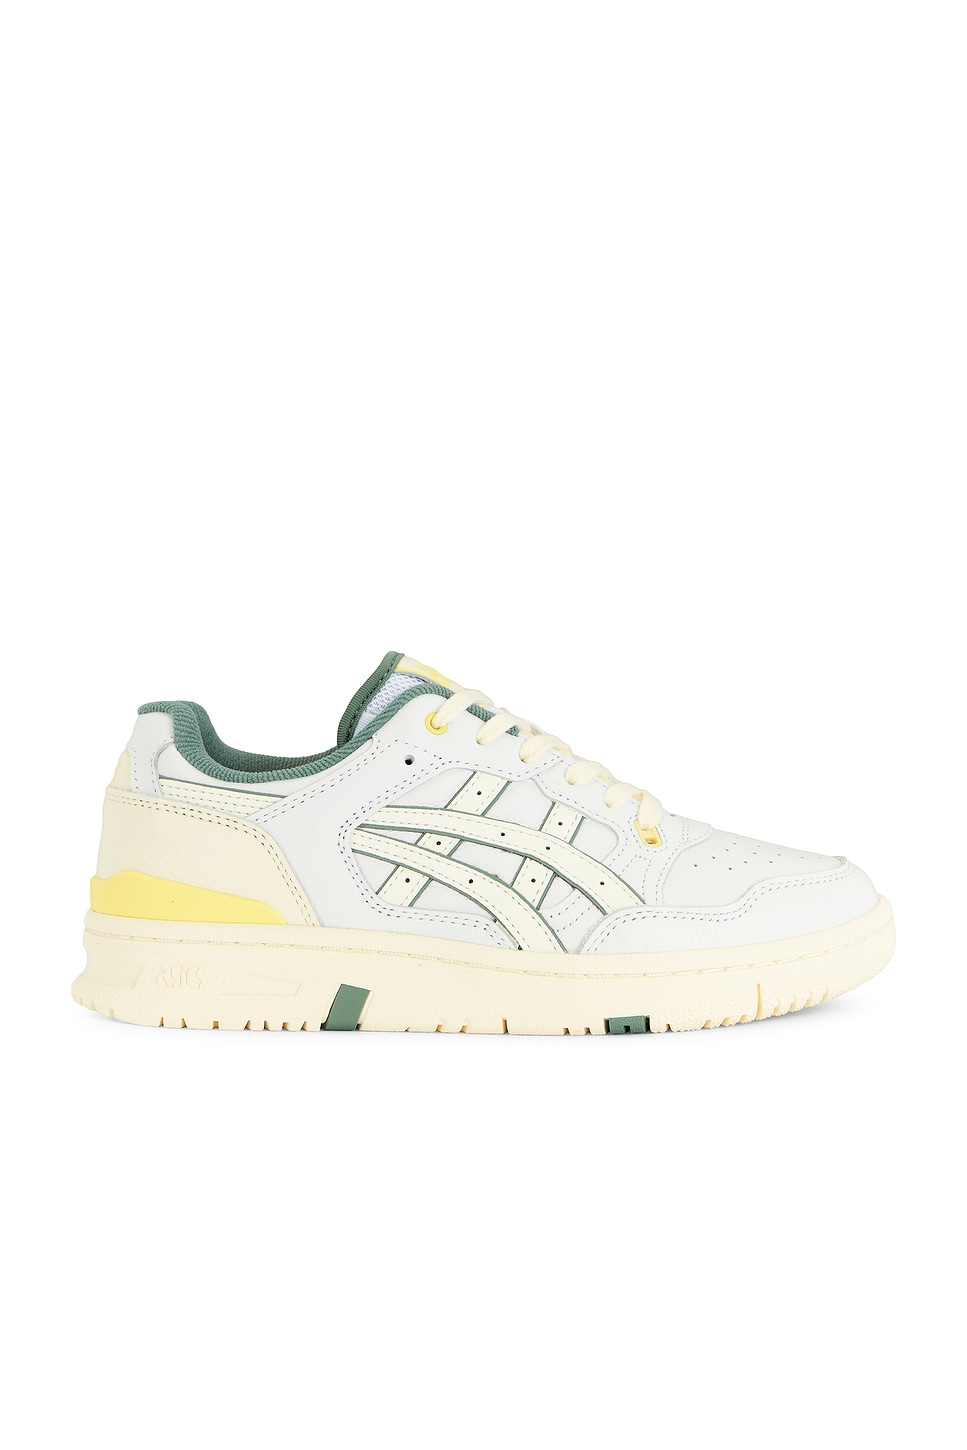 Image 1 of Asics EX89 Full Leather in White & Ivy